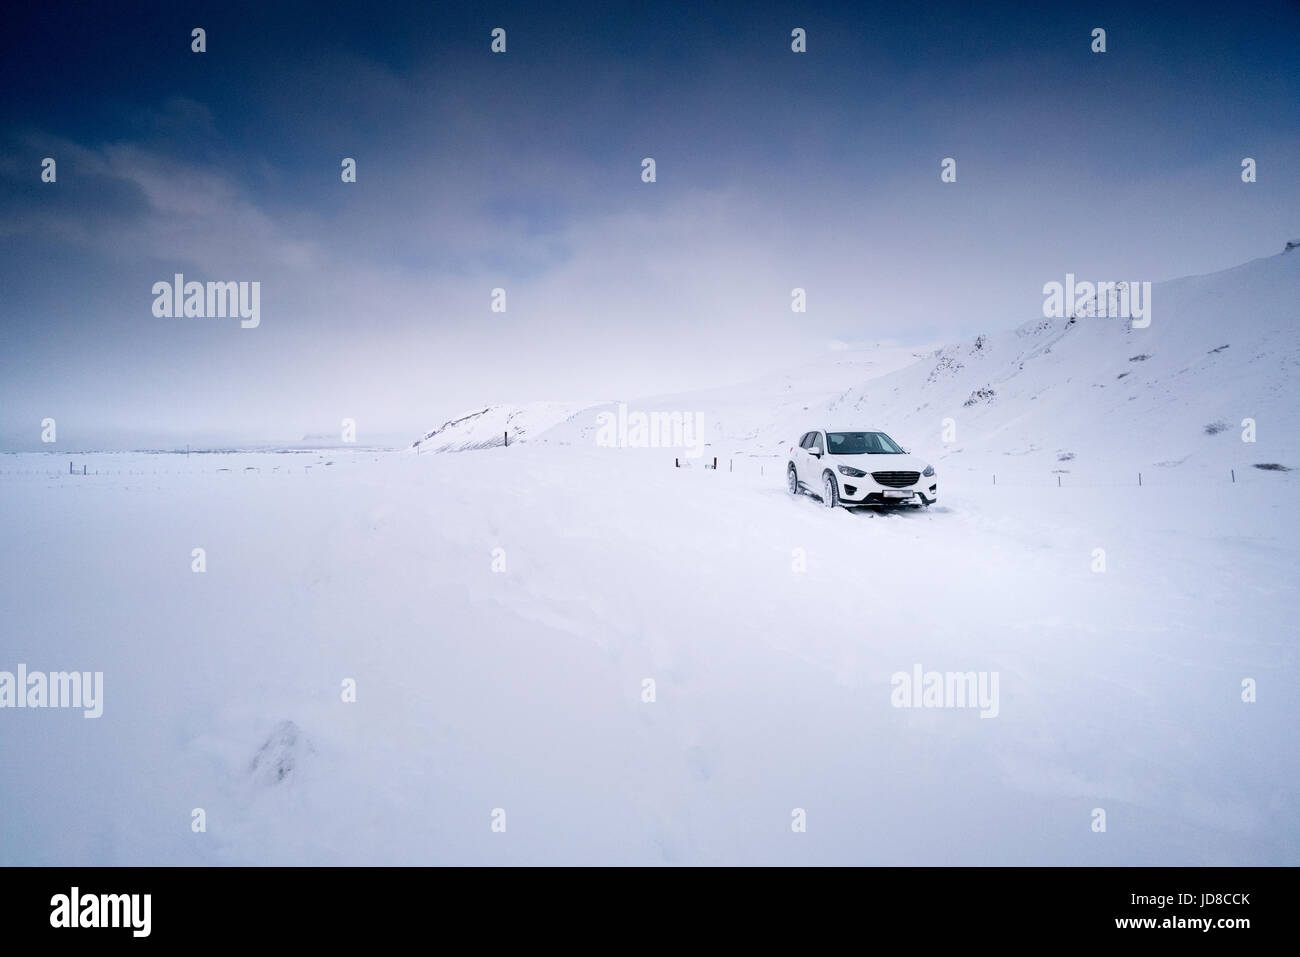 Stationary car on snow covered landscape by day, Iceland, Europe. Iceland nature 2017 winter cold Stock Photo